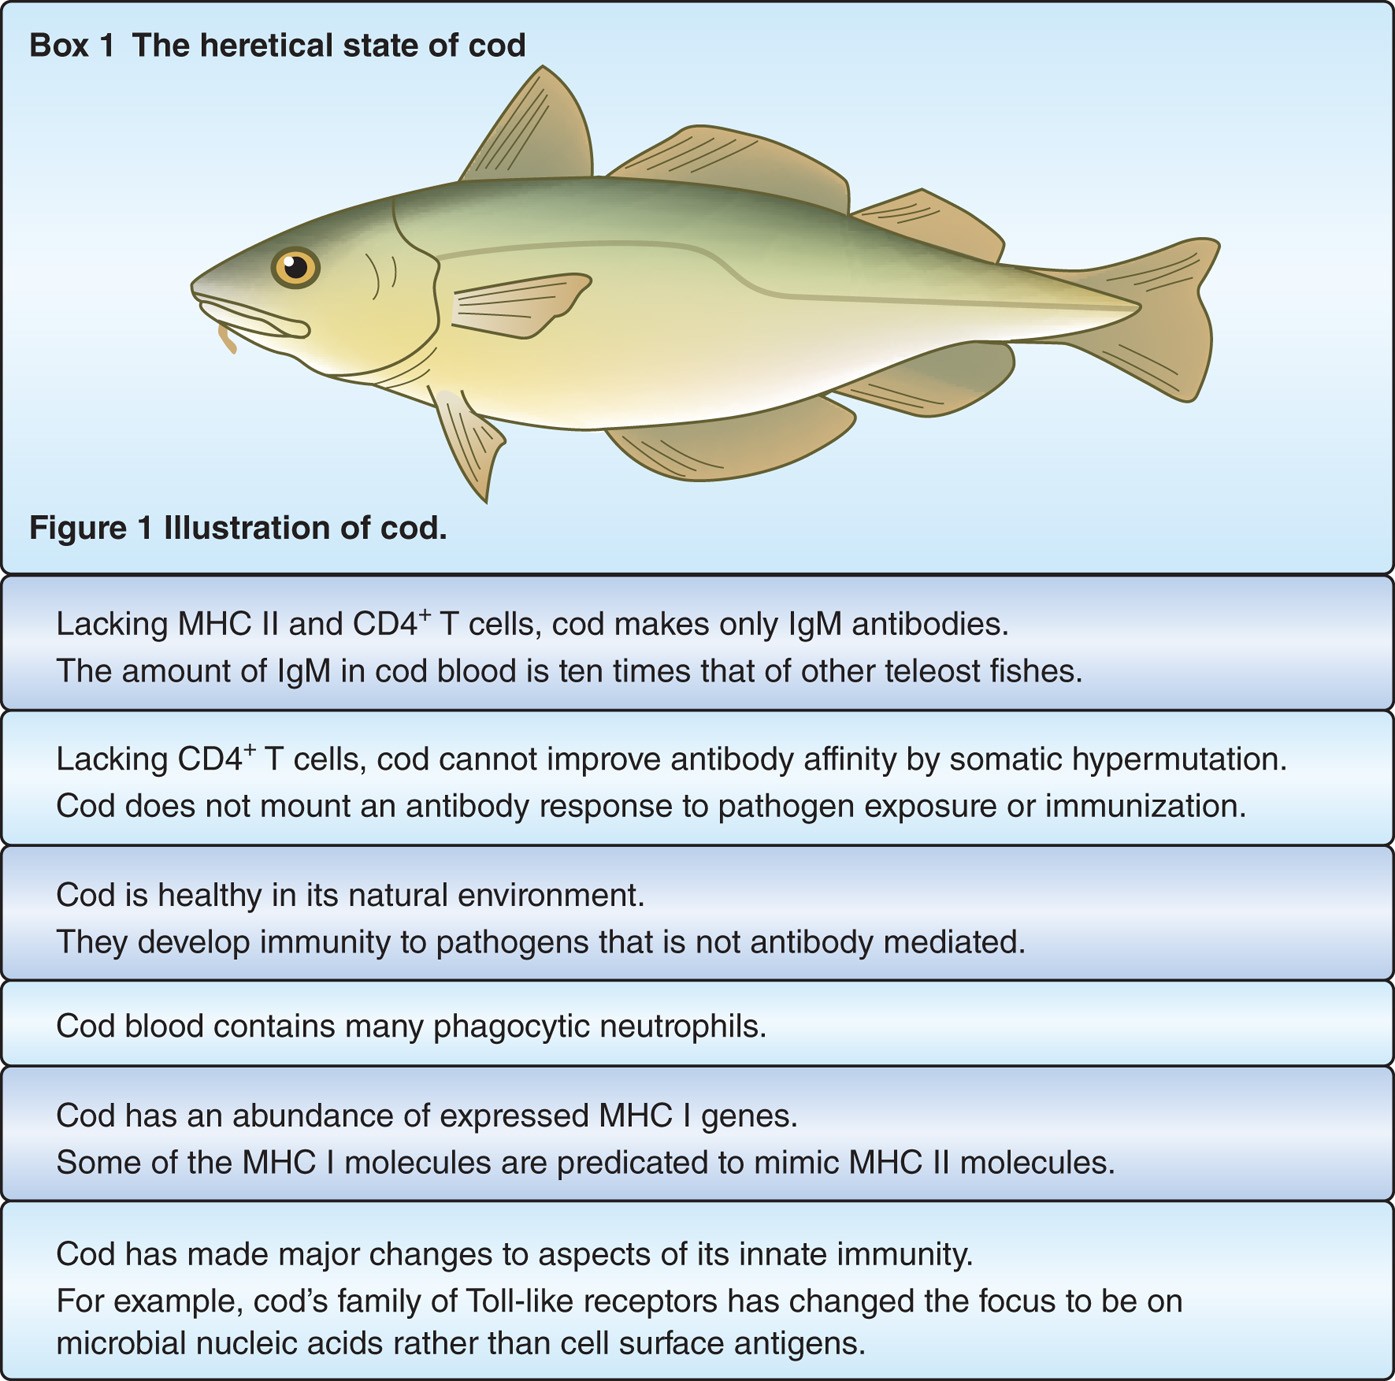 How the codfish changed its immune system